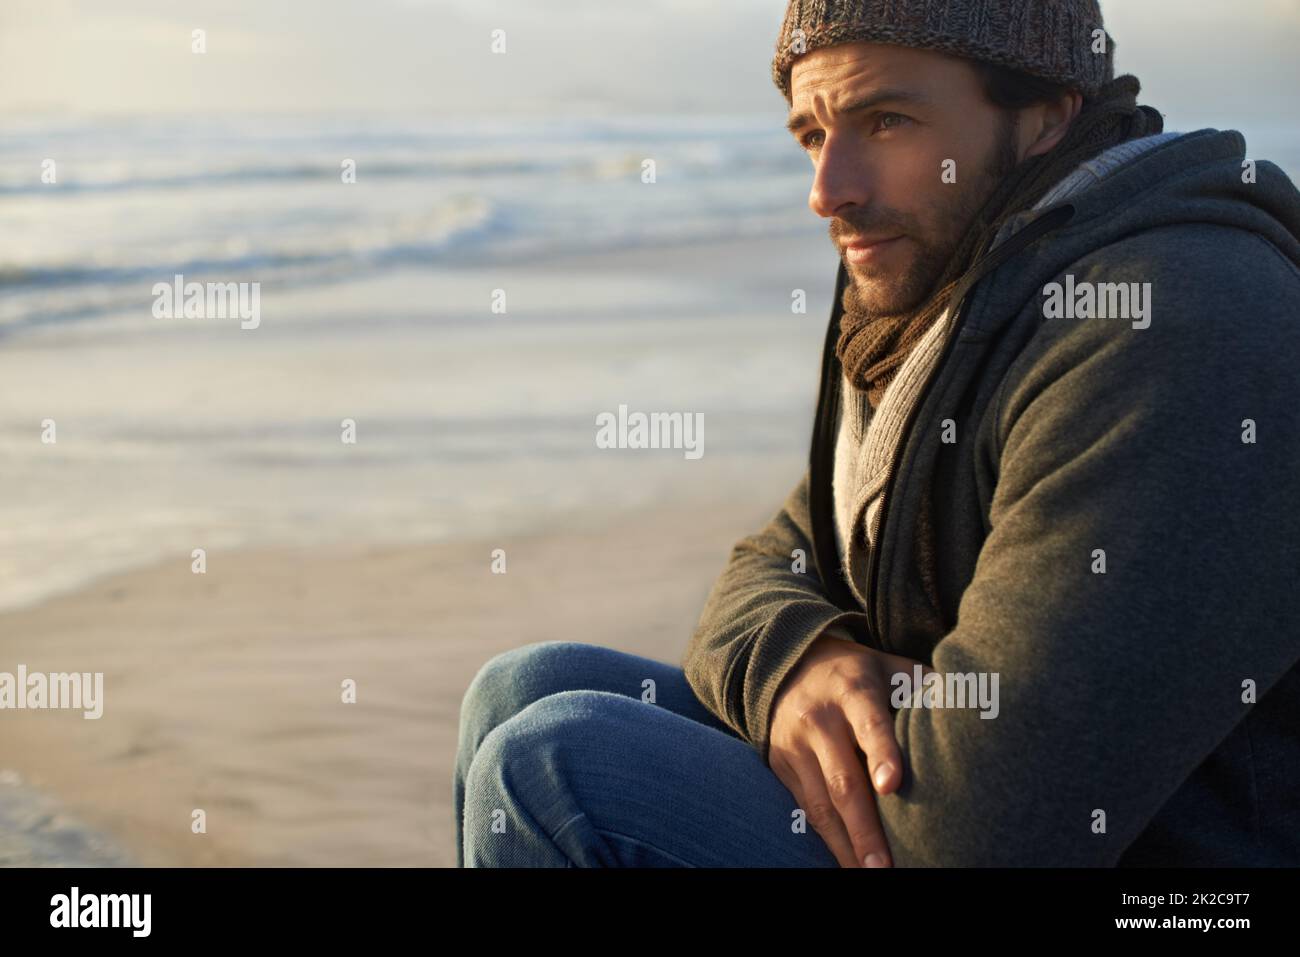 He enjoys being close to the ocean. A handsome young man at the beach. Stock Photo